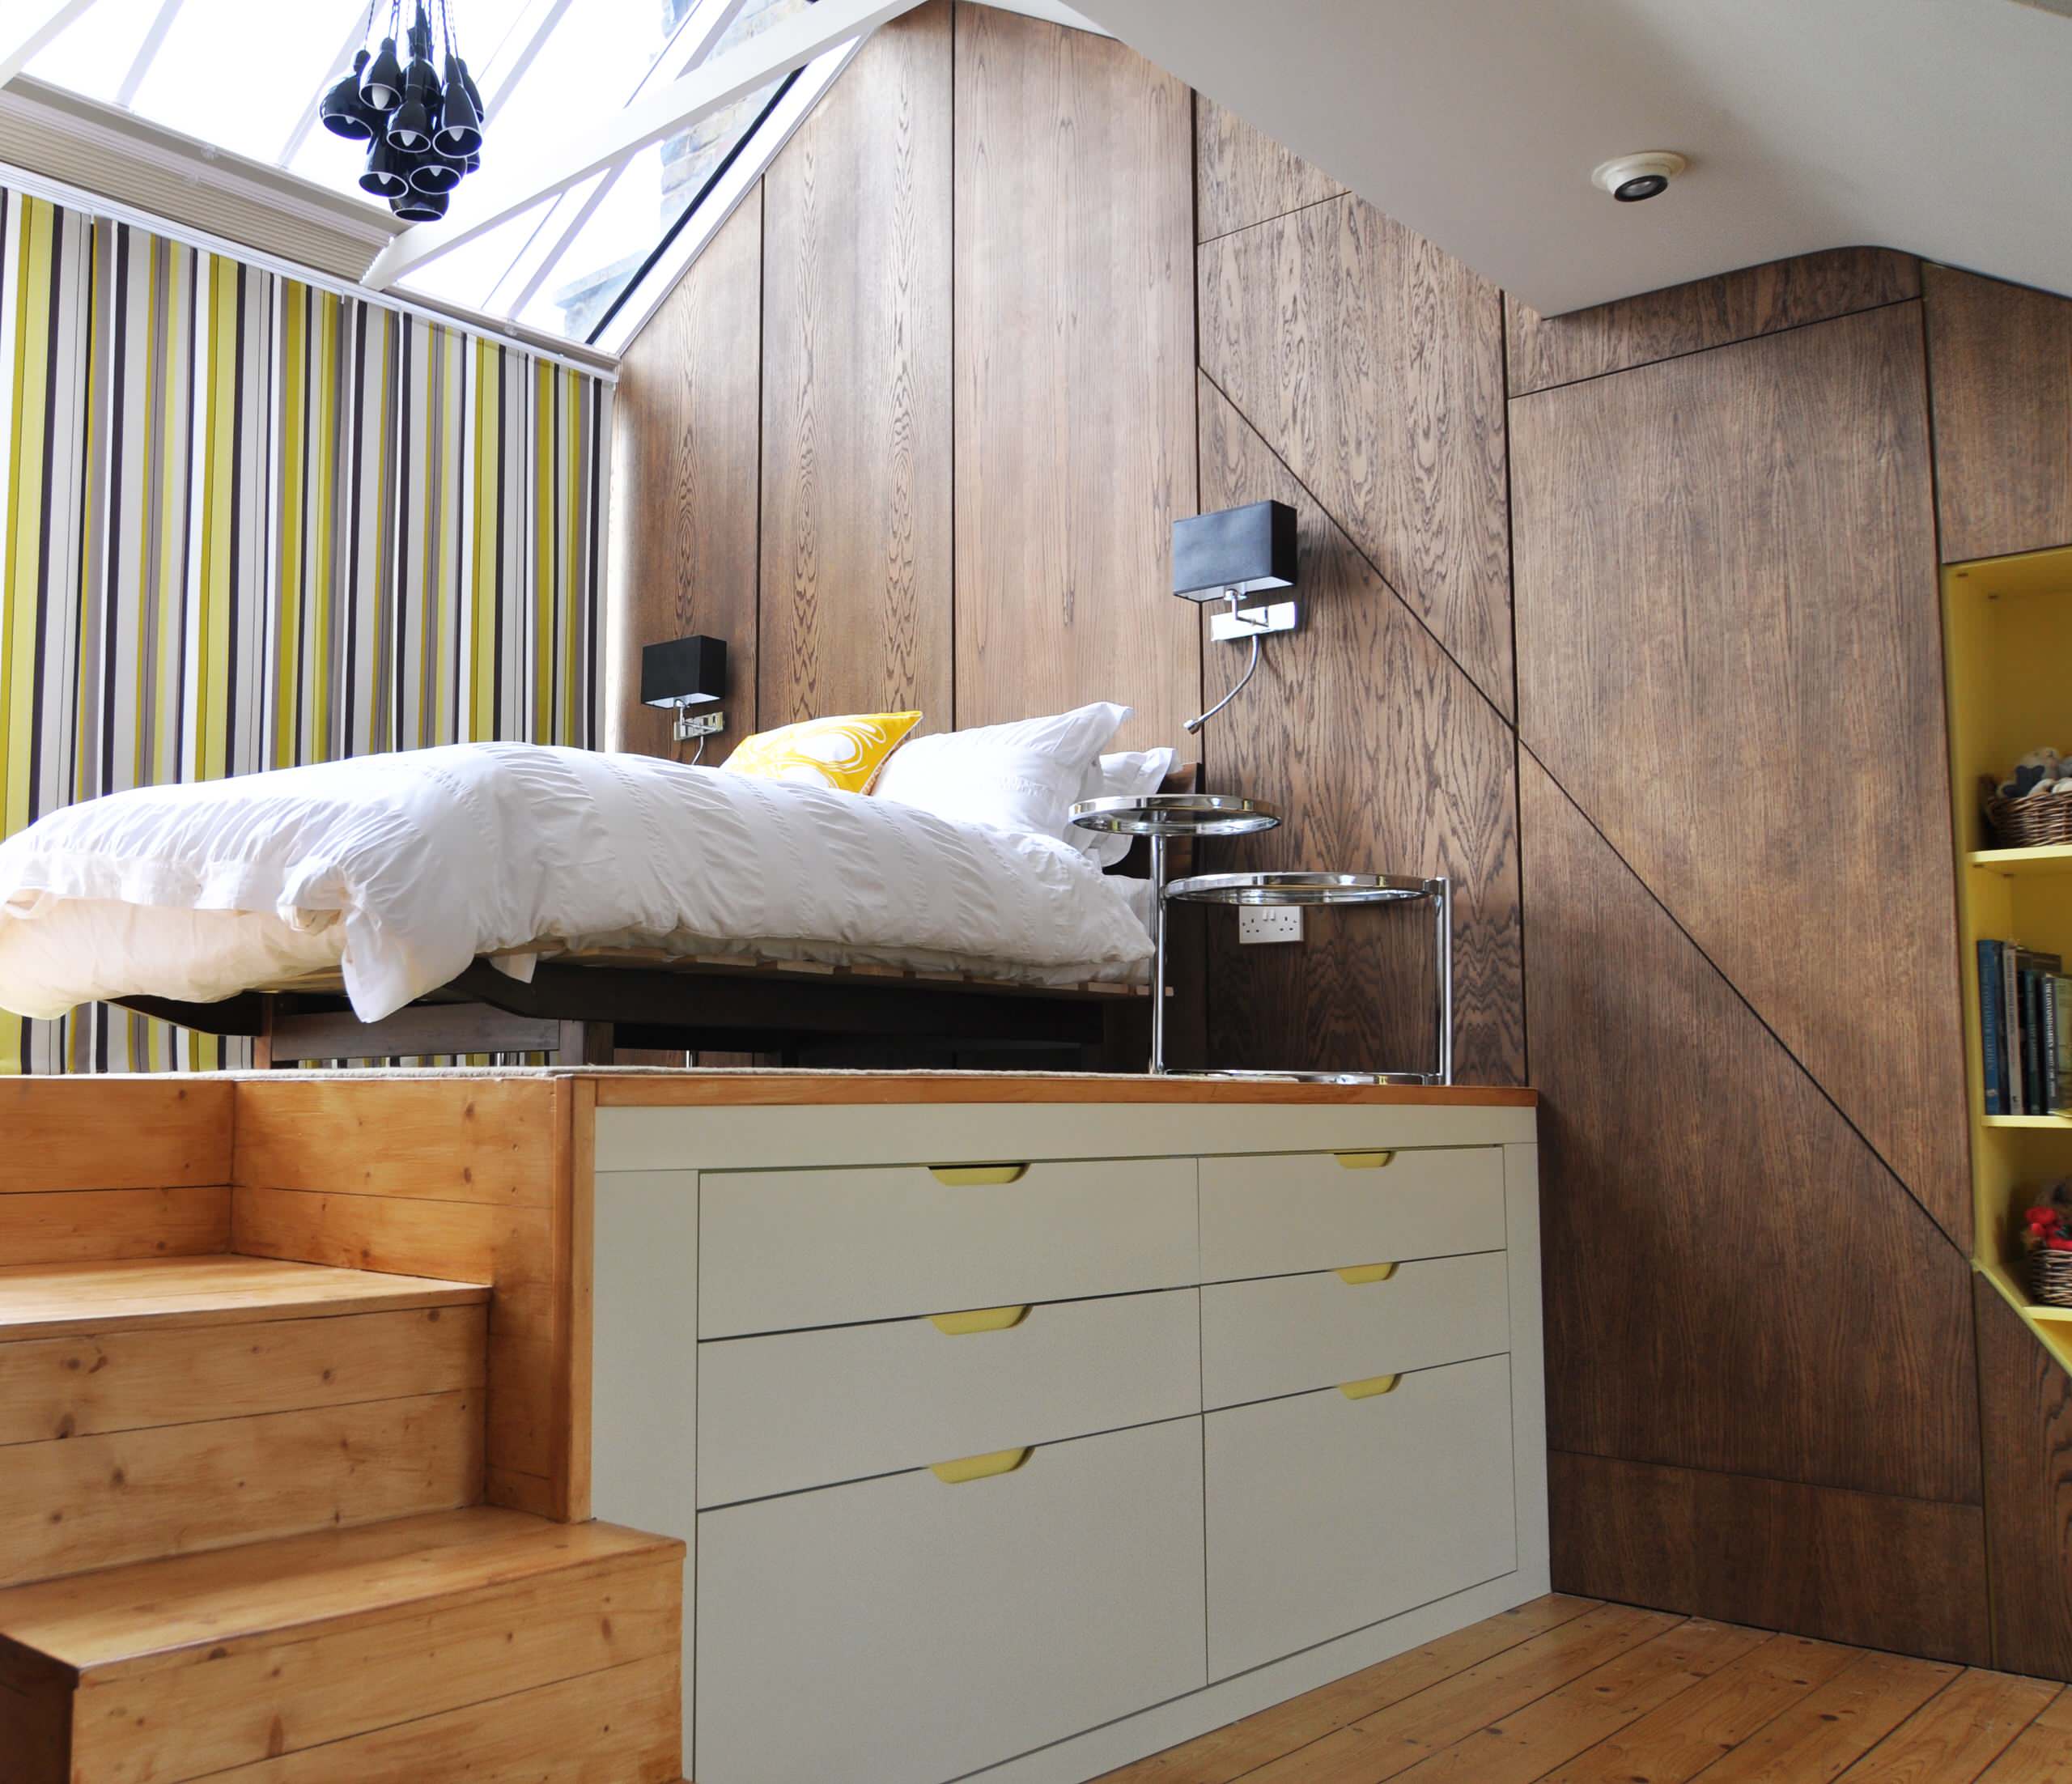 10 Times Built-in Storage Has Transformed a Bedroom | Houzz UK